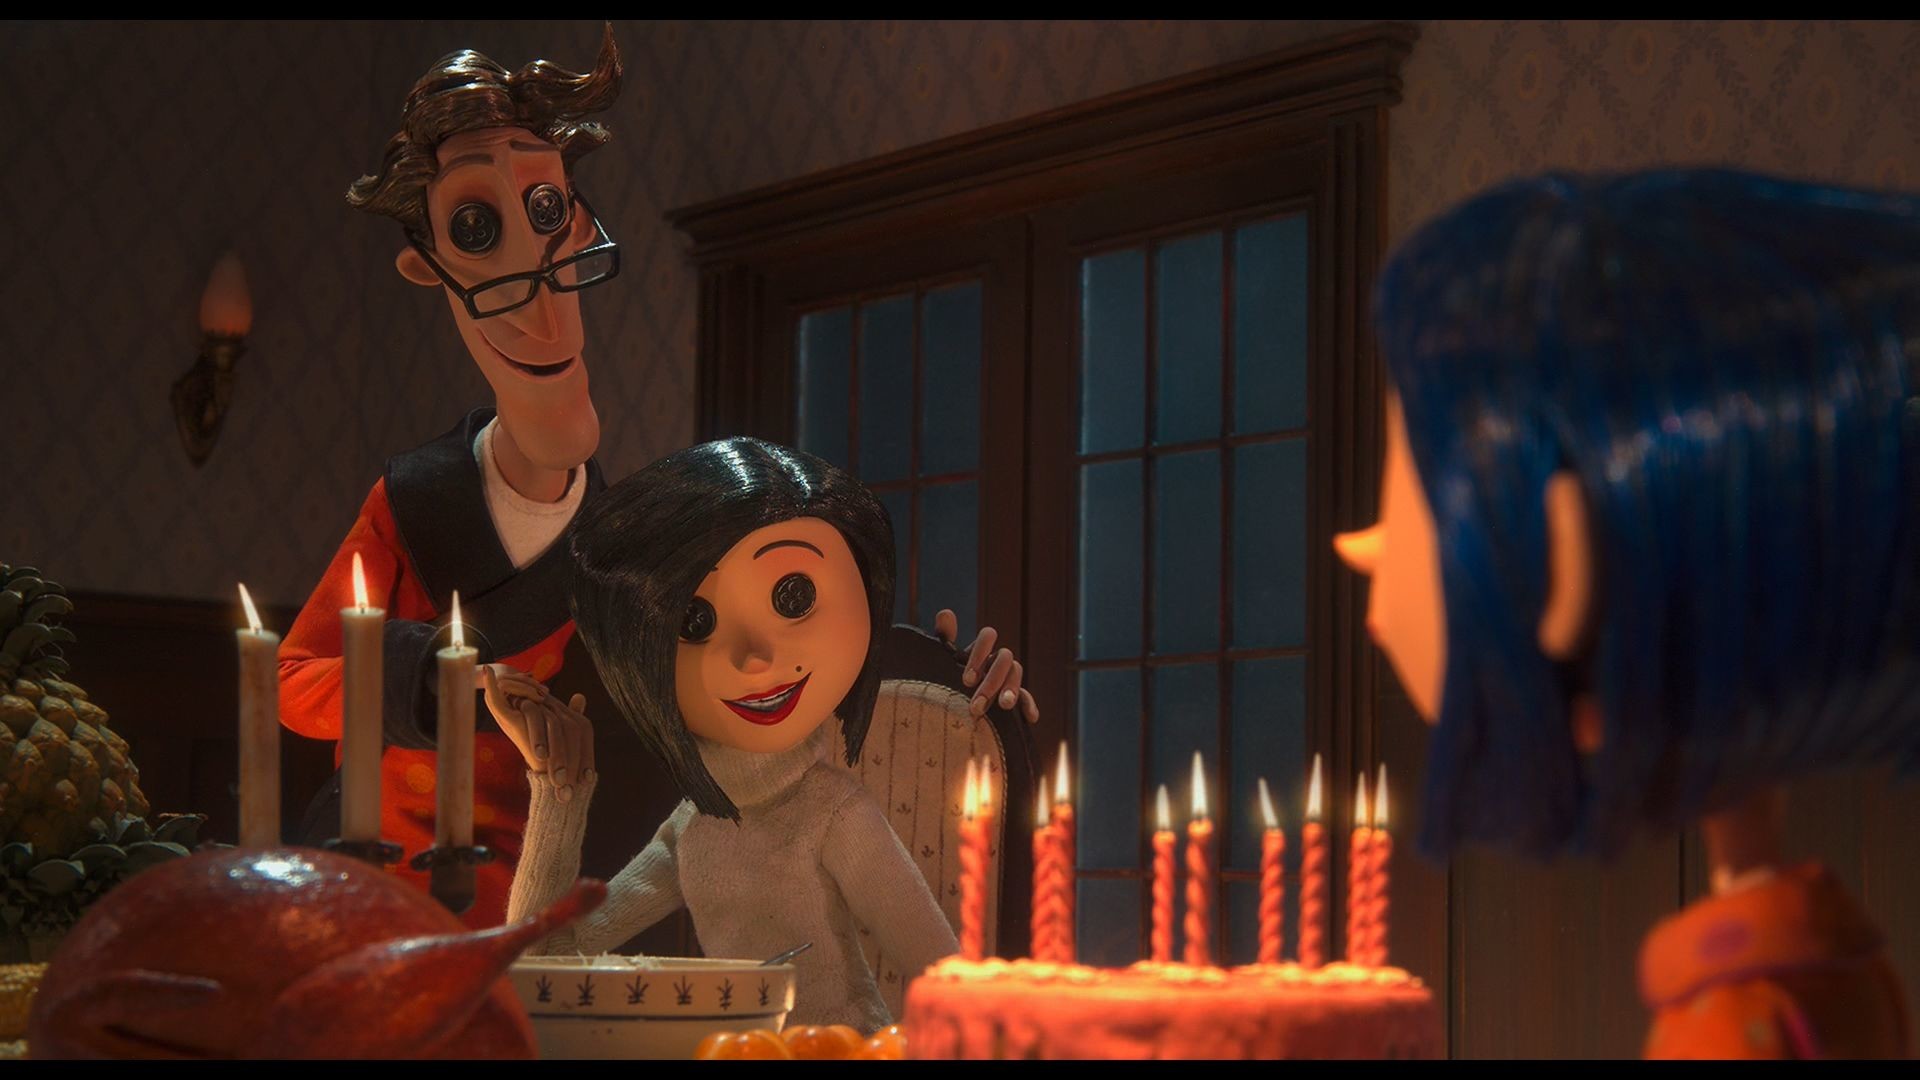 Download Coraline Wallpaper HD Free for Android  Coraline Wallpaper HD APK  Download  STEPrimocom